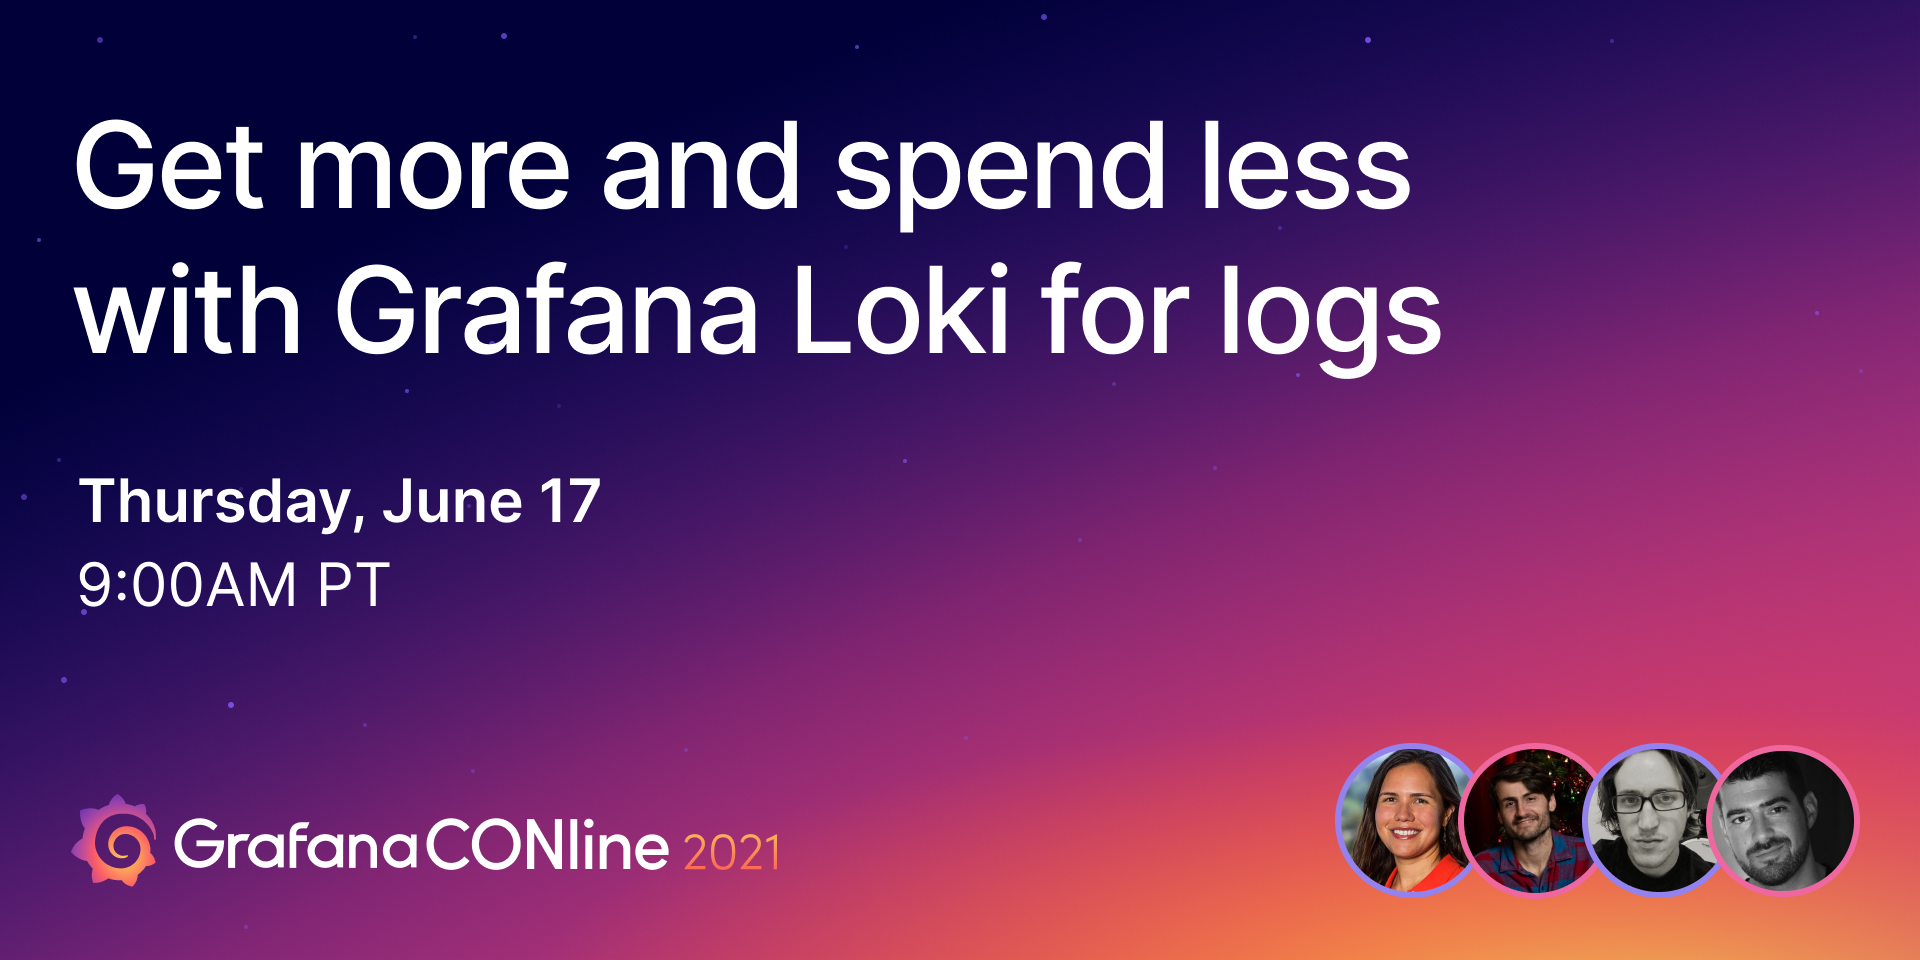 Get more and spend less with Grafana Loki for logs